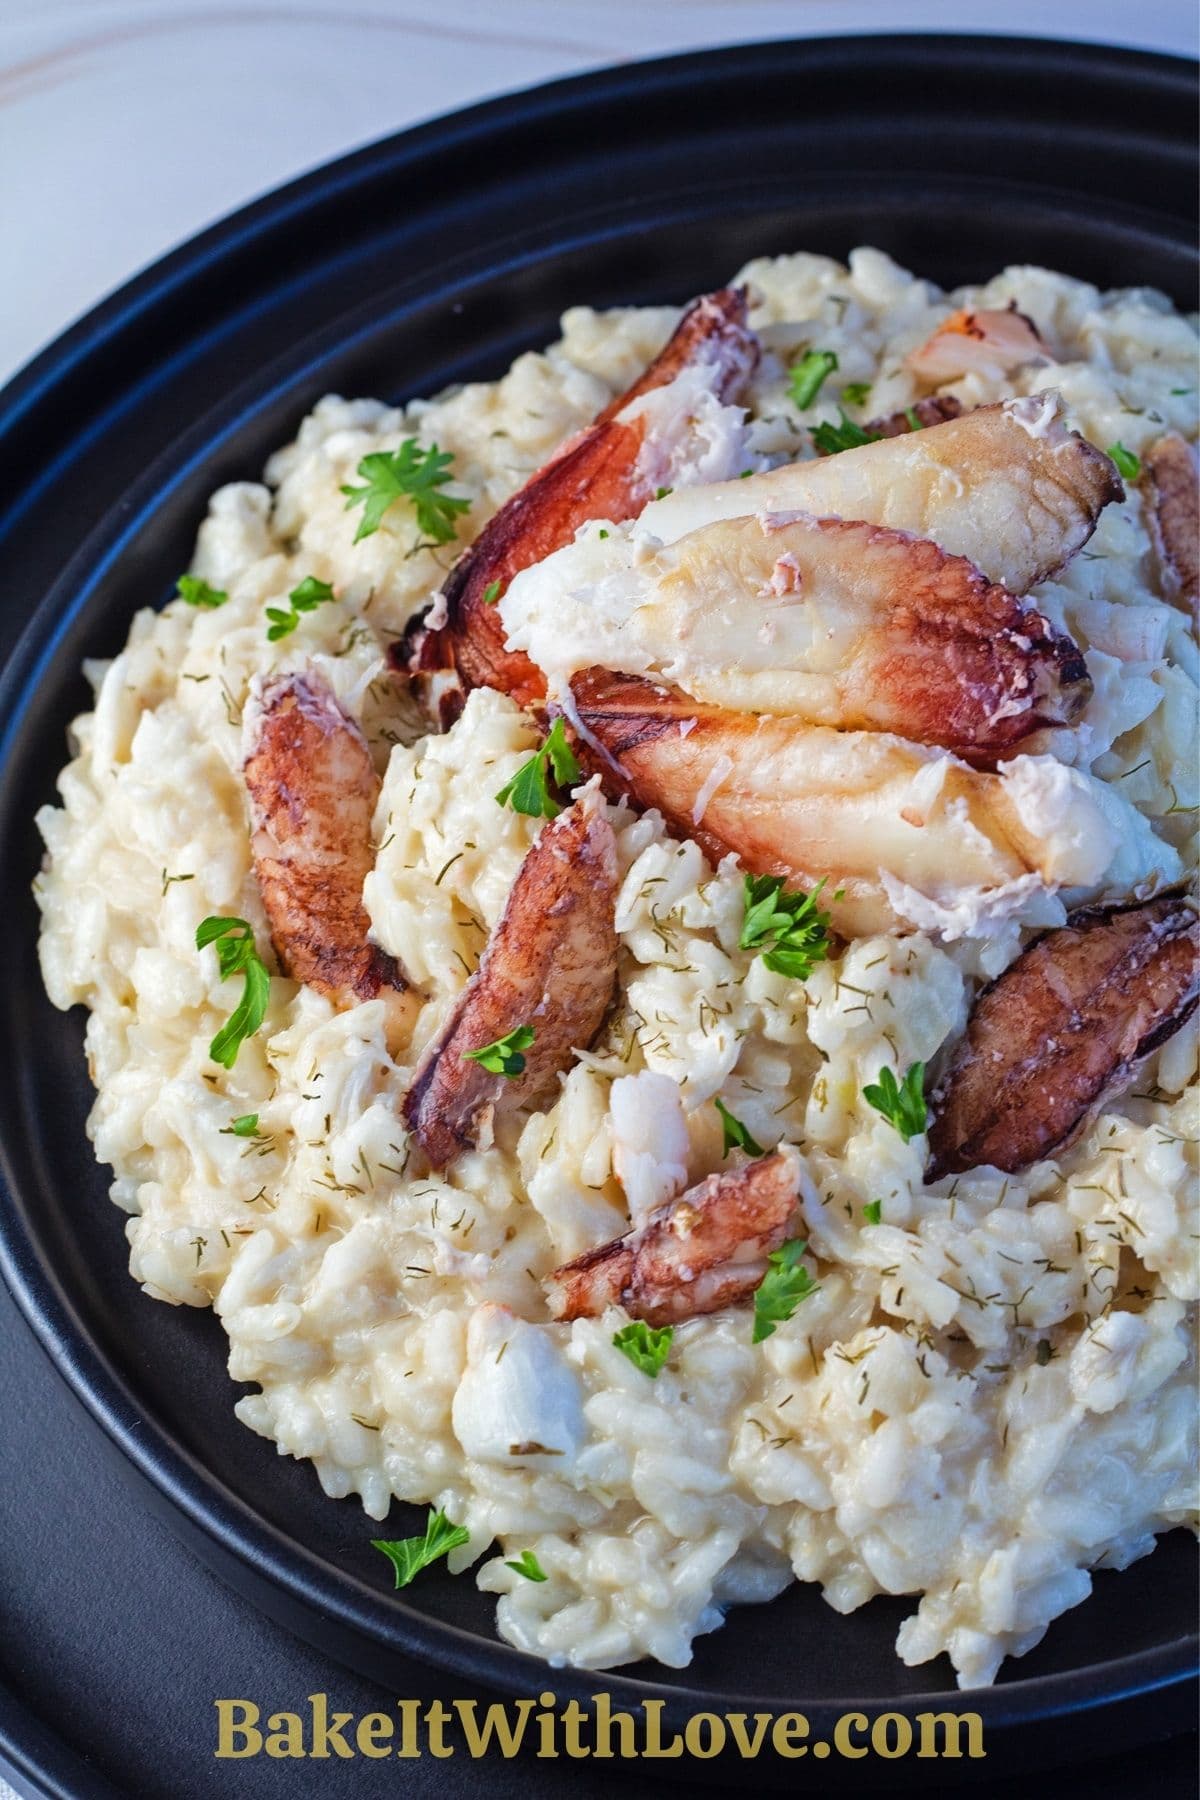 Crab risotto served on blackplate with crab meat and parsley garnish.